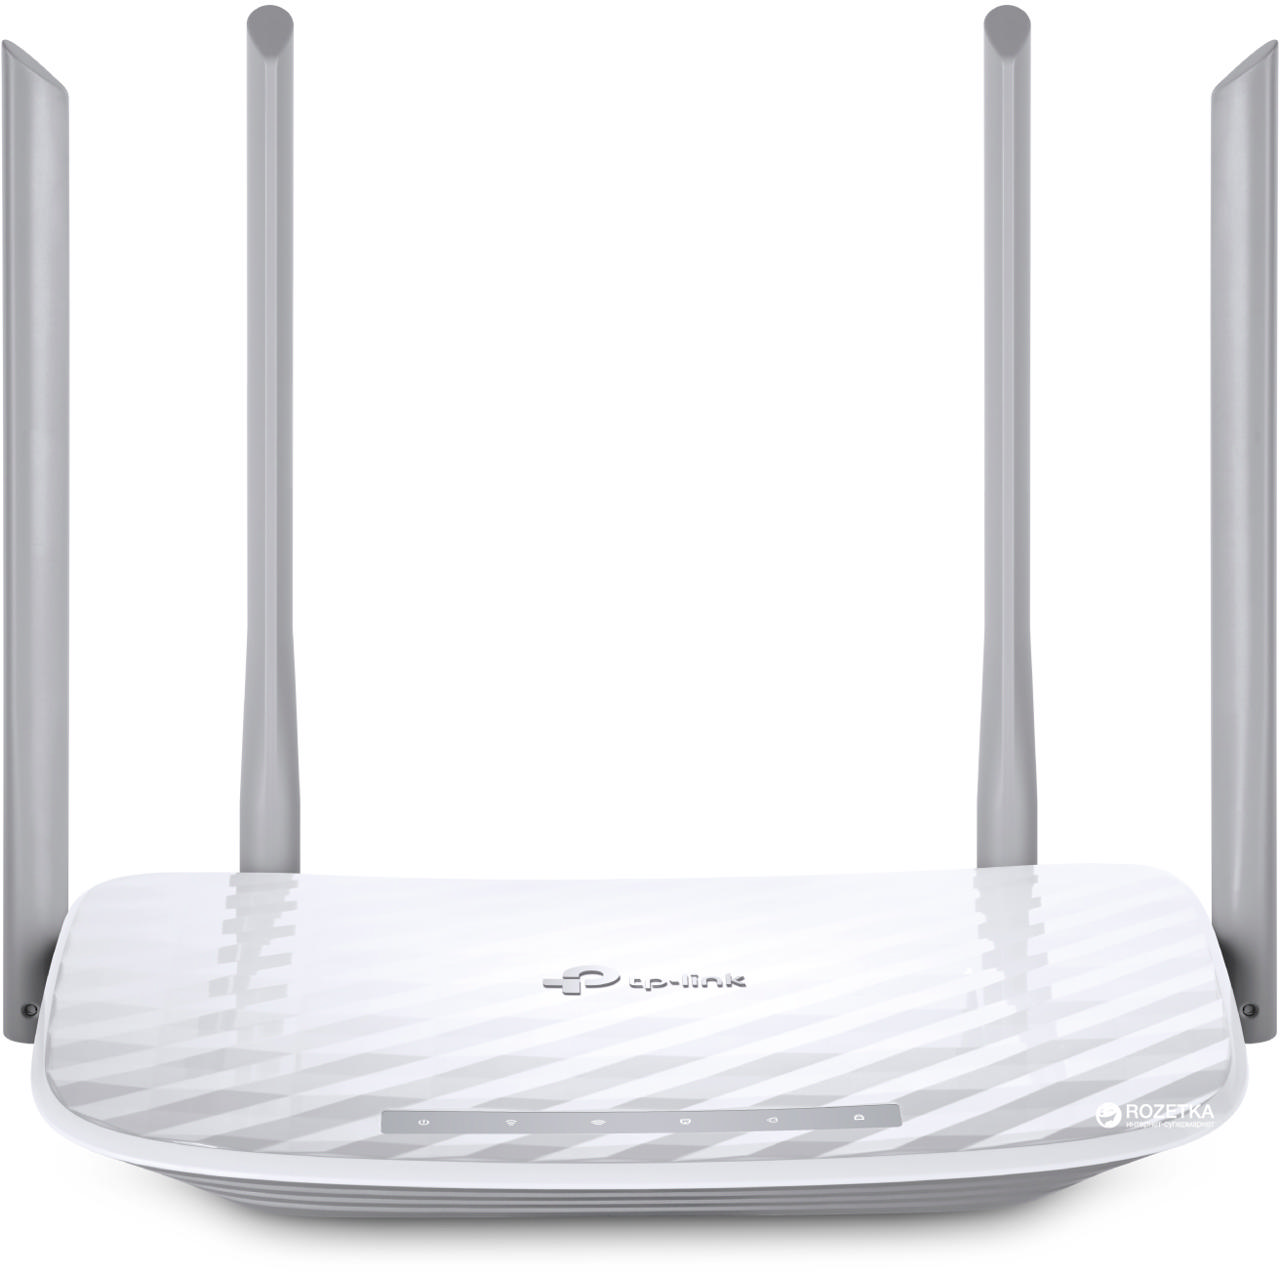 AC1200 DUAL BAND WIRELESS CABLE ROUTER